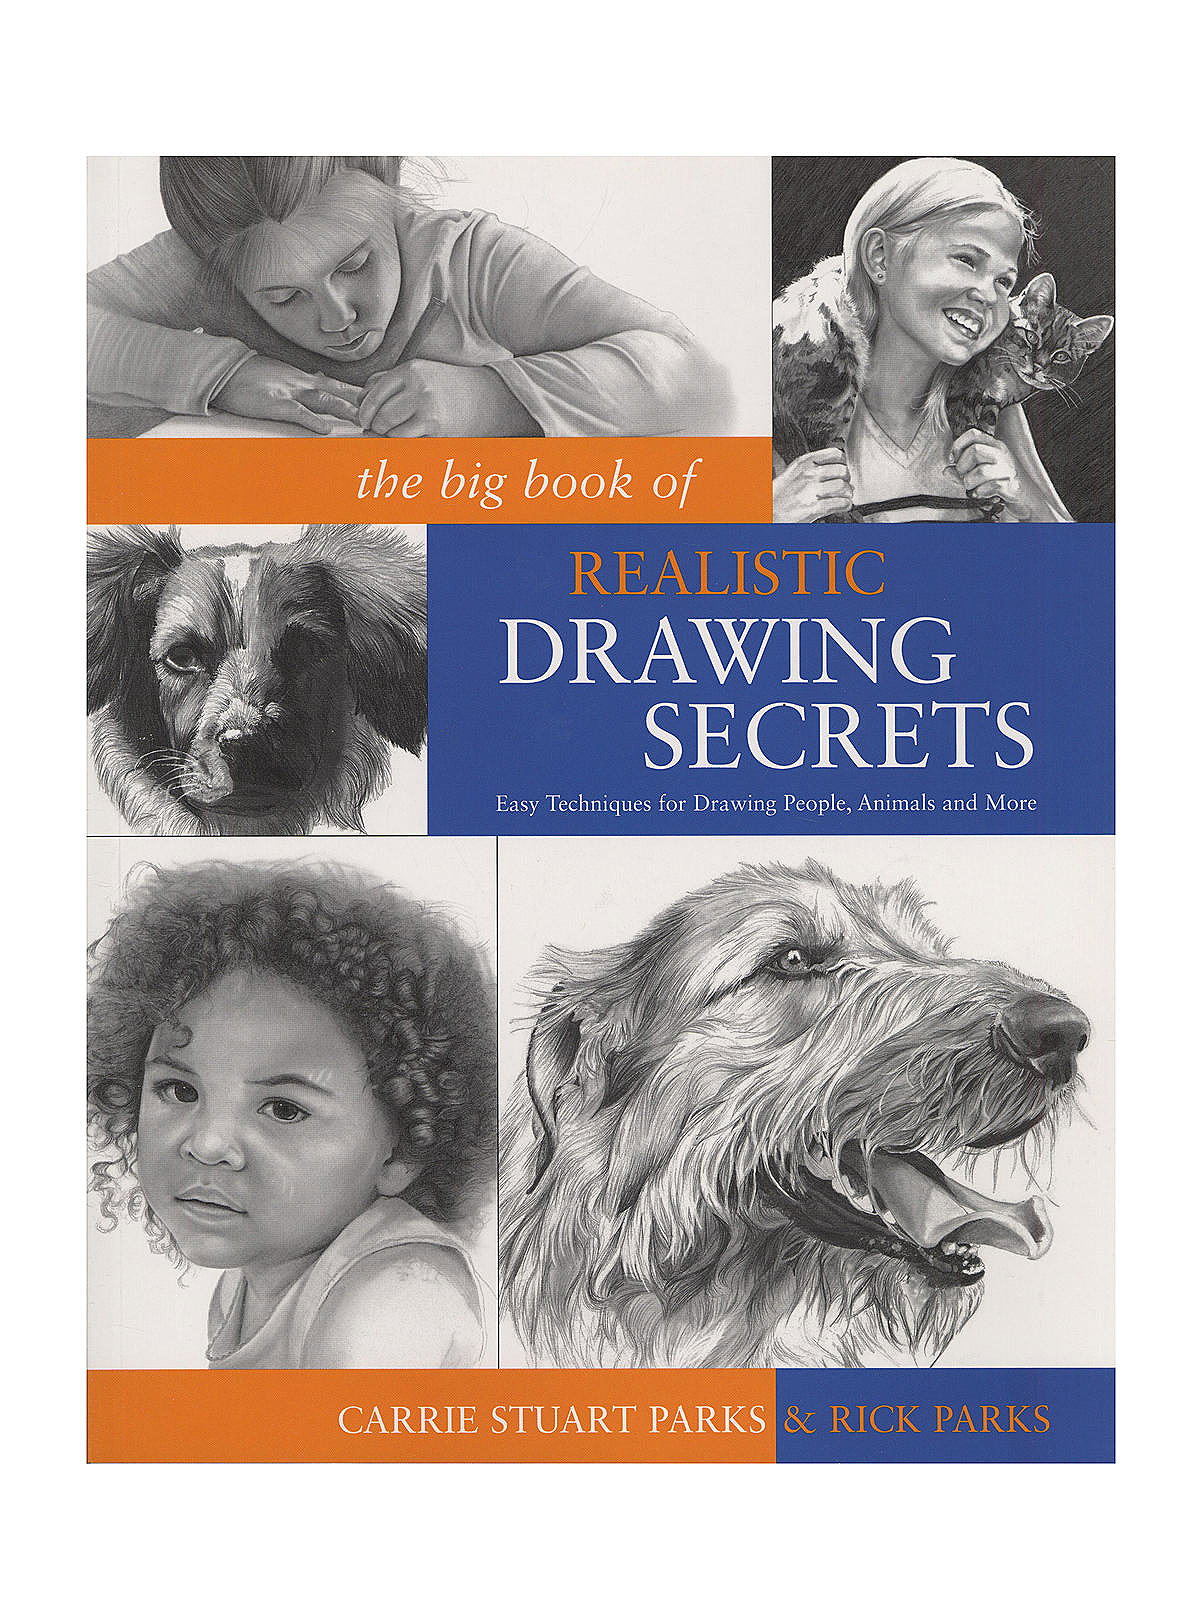 The Big Book of Realistic Drawing Secrets (review)